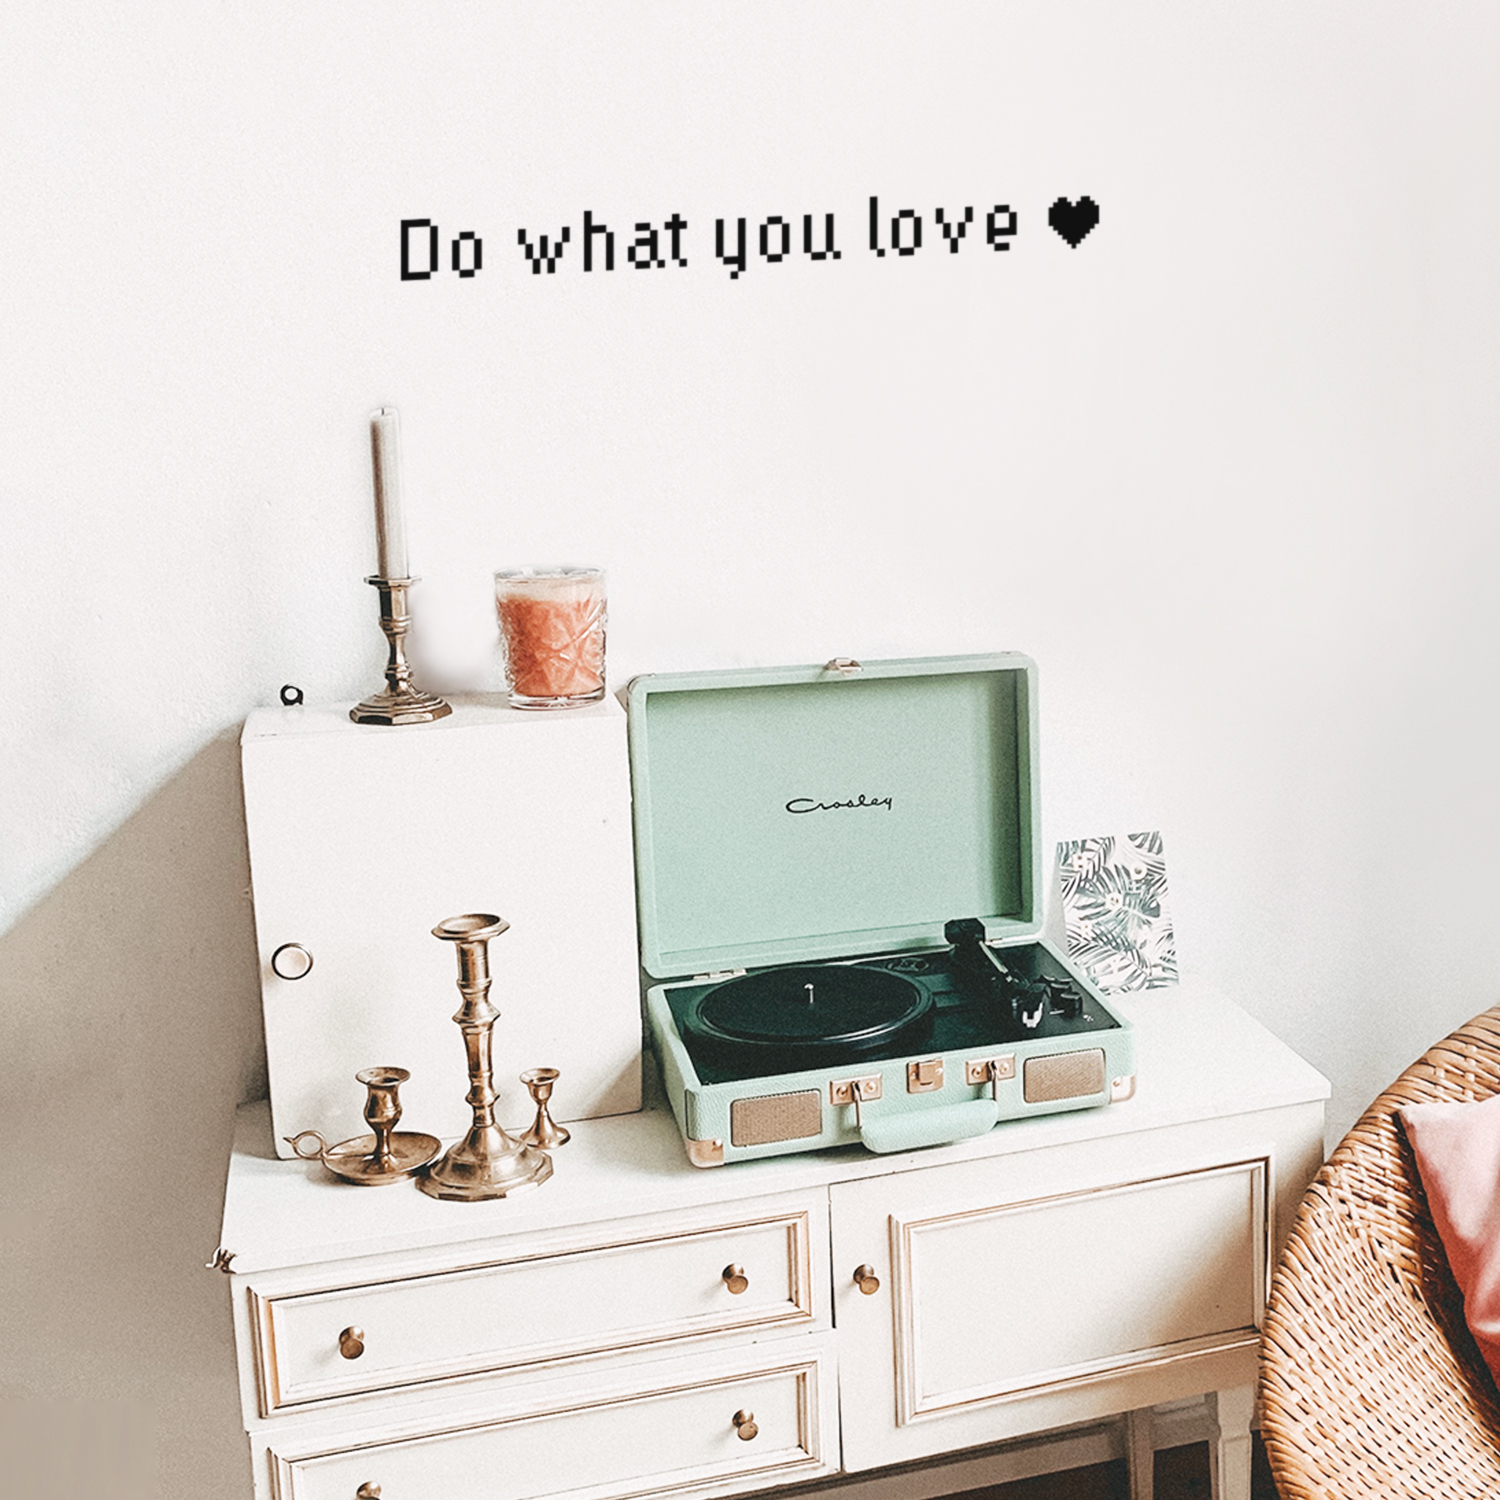 Vinyl Wall Art Decal 15" x 30" Do What You Love Motivational Quote Home 